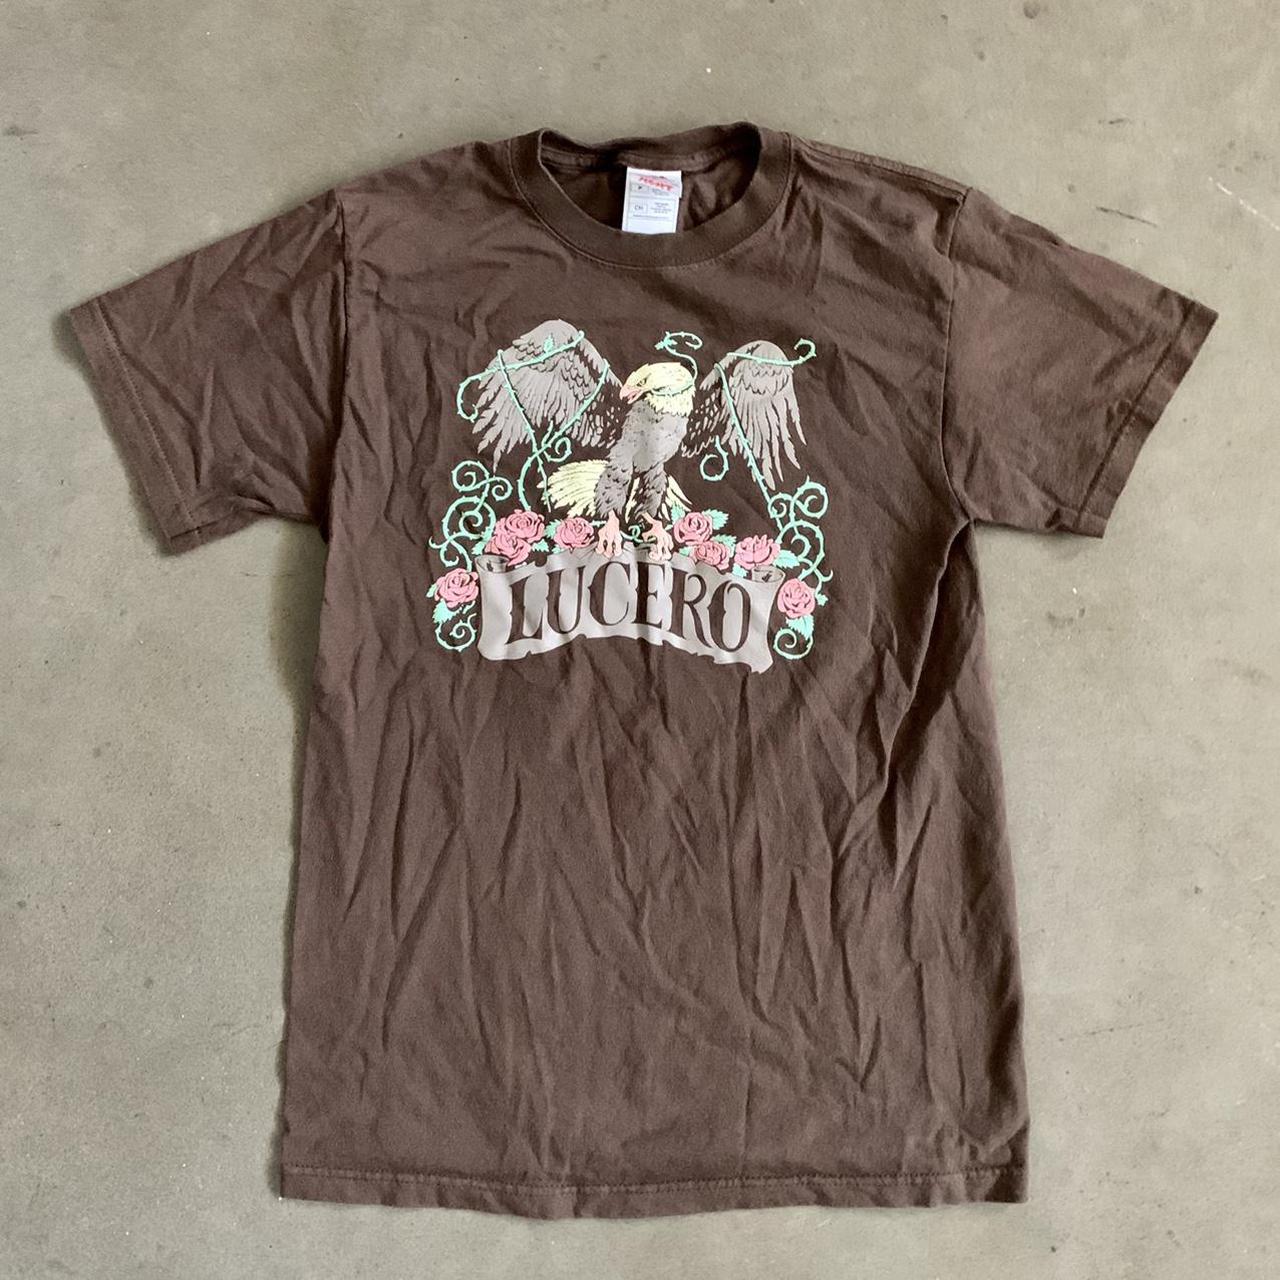 Product Image 2 - Vintage late 90s/early 00s Lucero